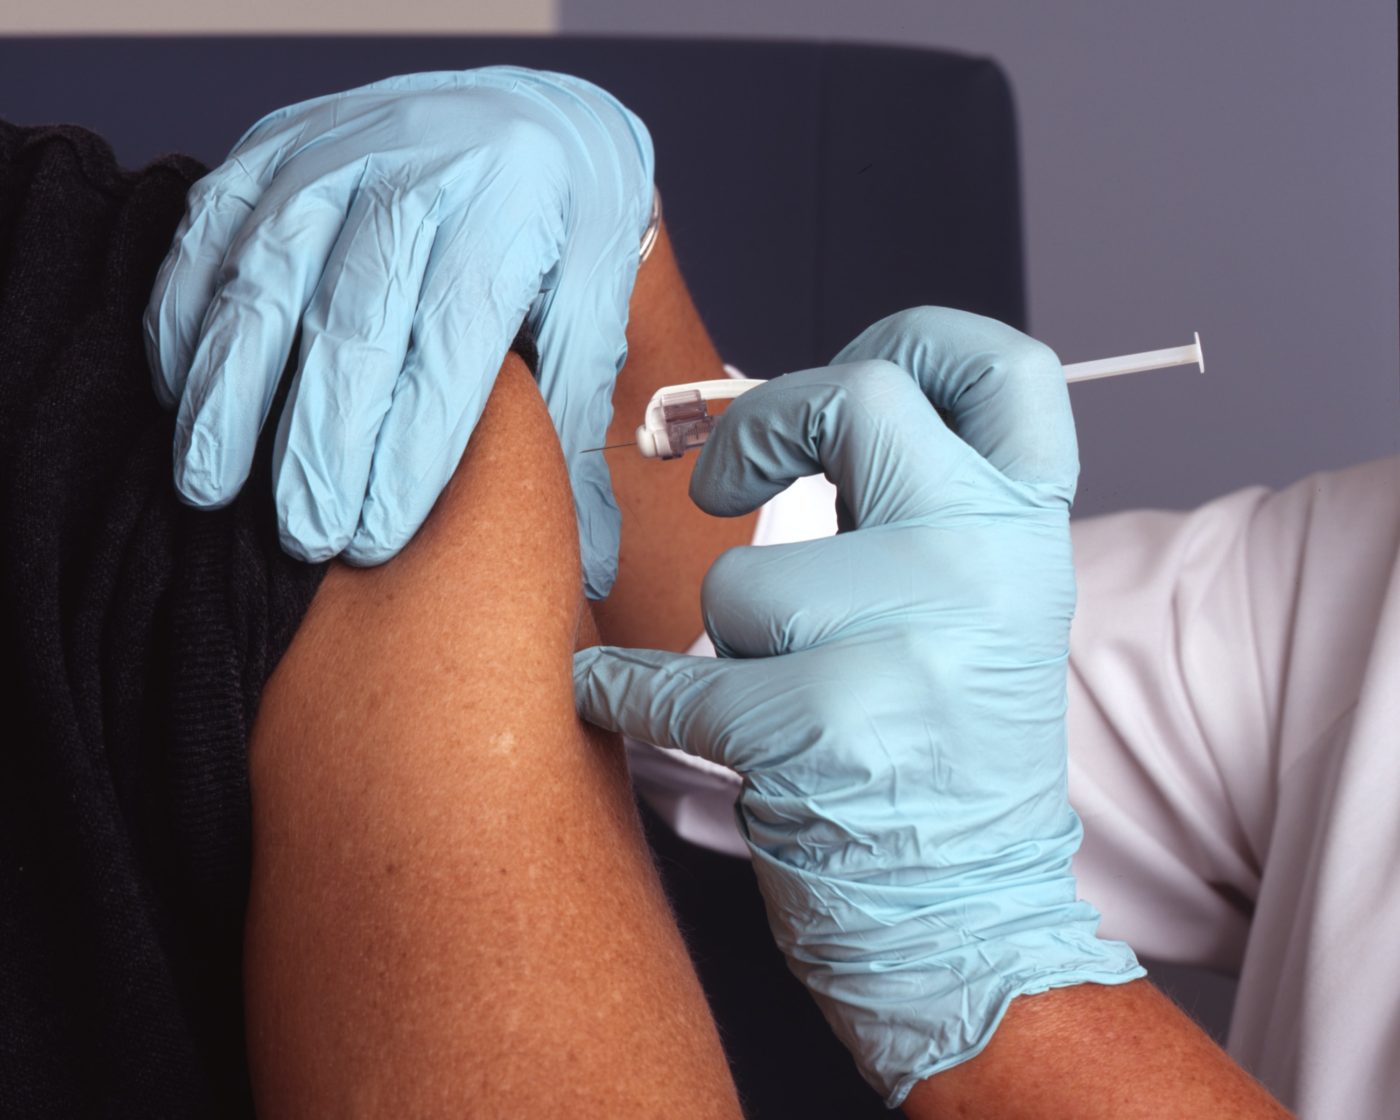 can you get an injury from a vaccine